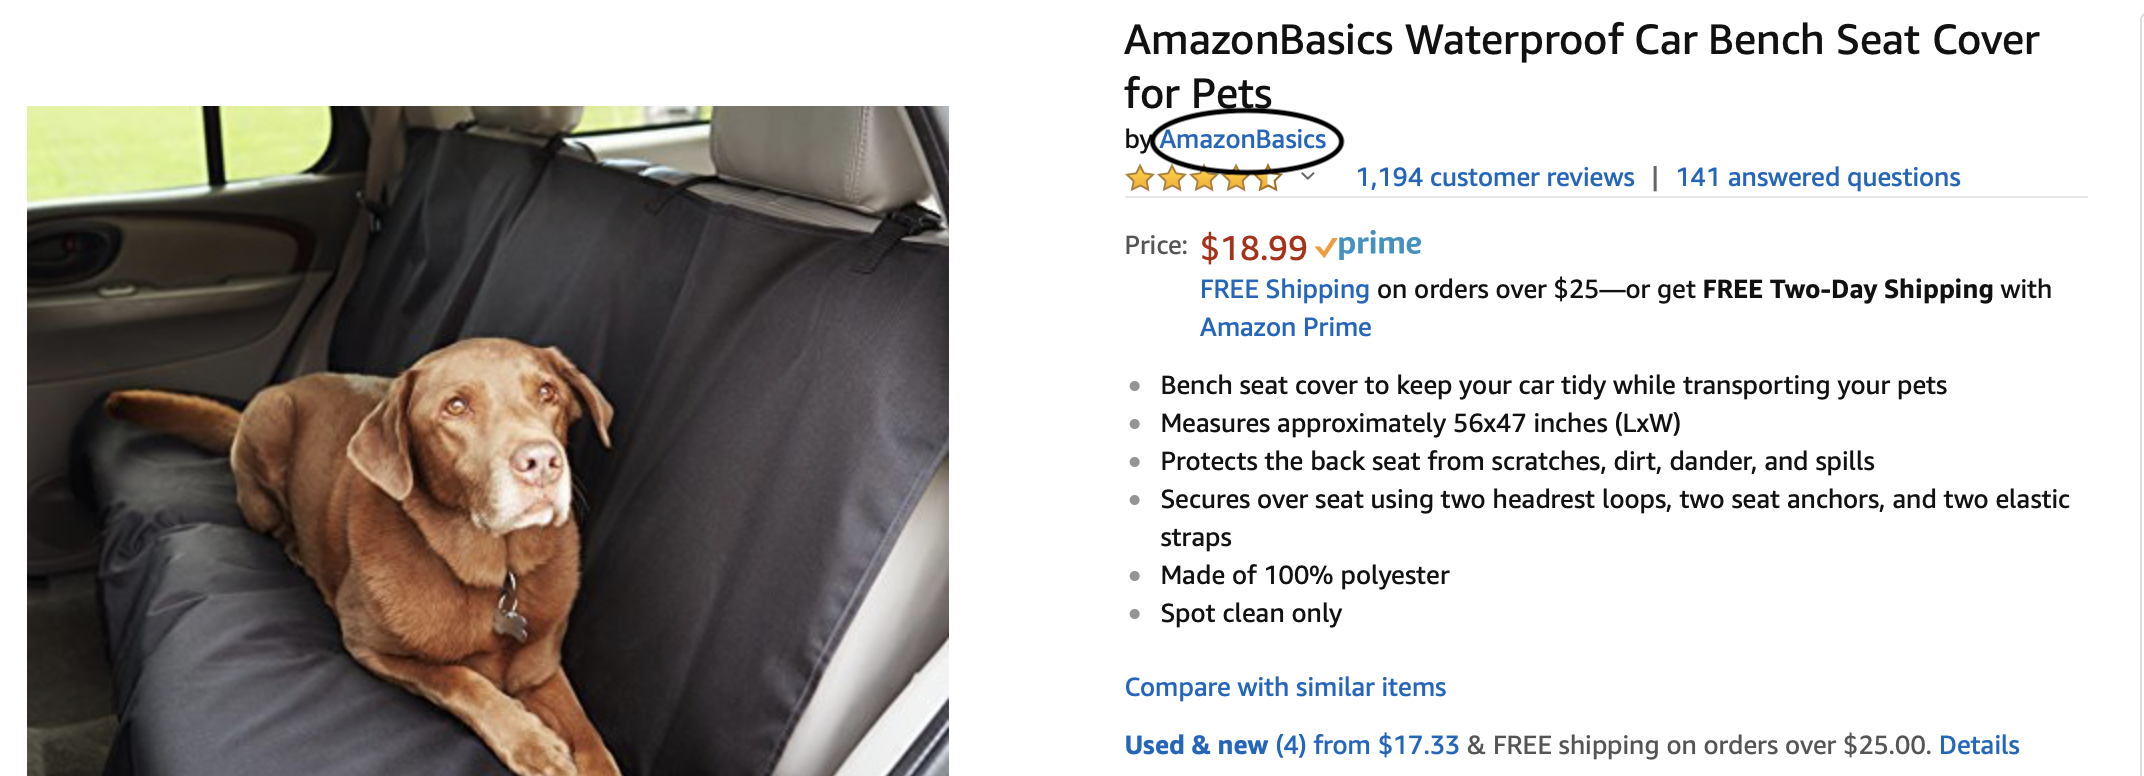 AmazonBasics Waterproof car bench seat cover for pets